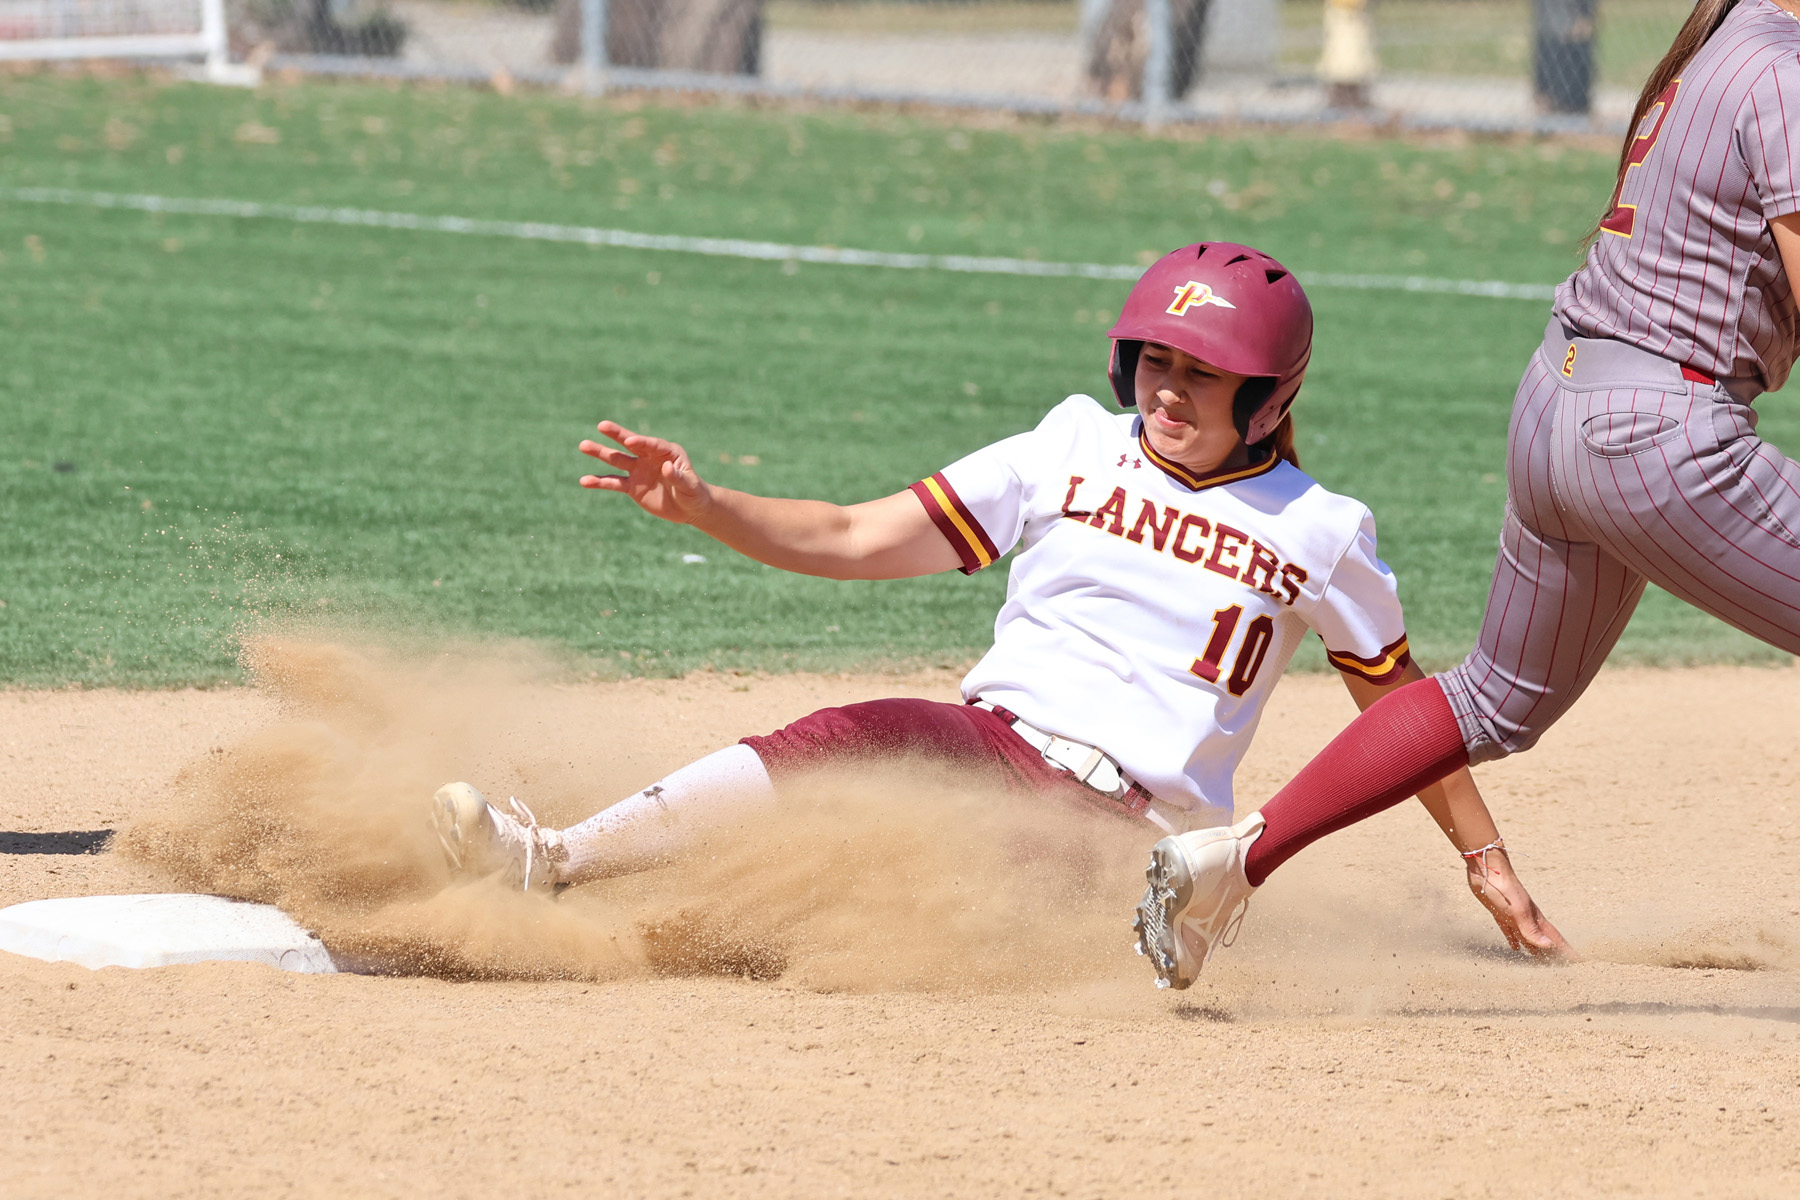 Breanna Negrete slides into second base during PCC's win on Tuesday (photo and gallery by Richard Quinton).